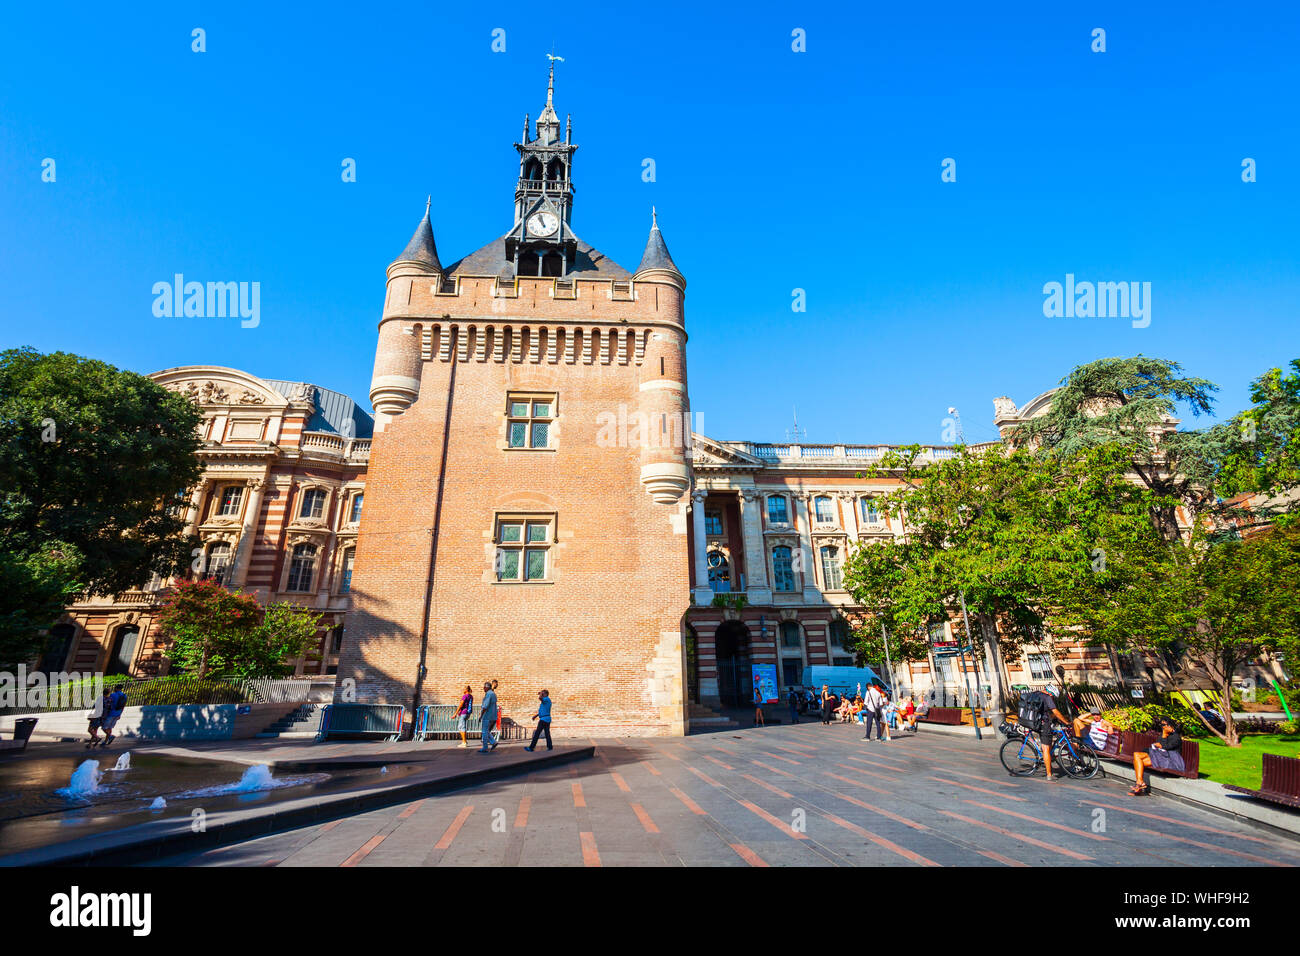 TOULOUSE, FRANCE - SEPTEMBER 20, 2018: Capitole Donjon or Medieval Dungeon tower at Place du Capitole, Toulouse. Now is Tourist Information Center off Stock Photo